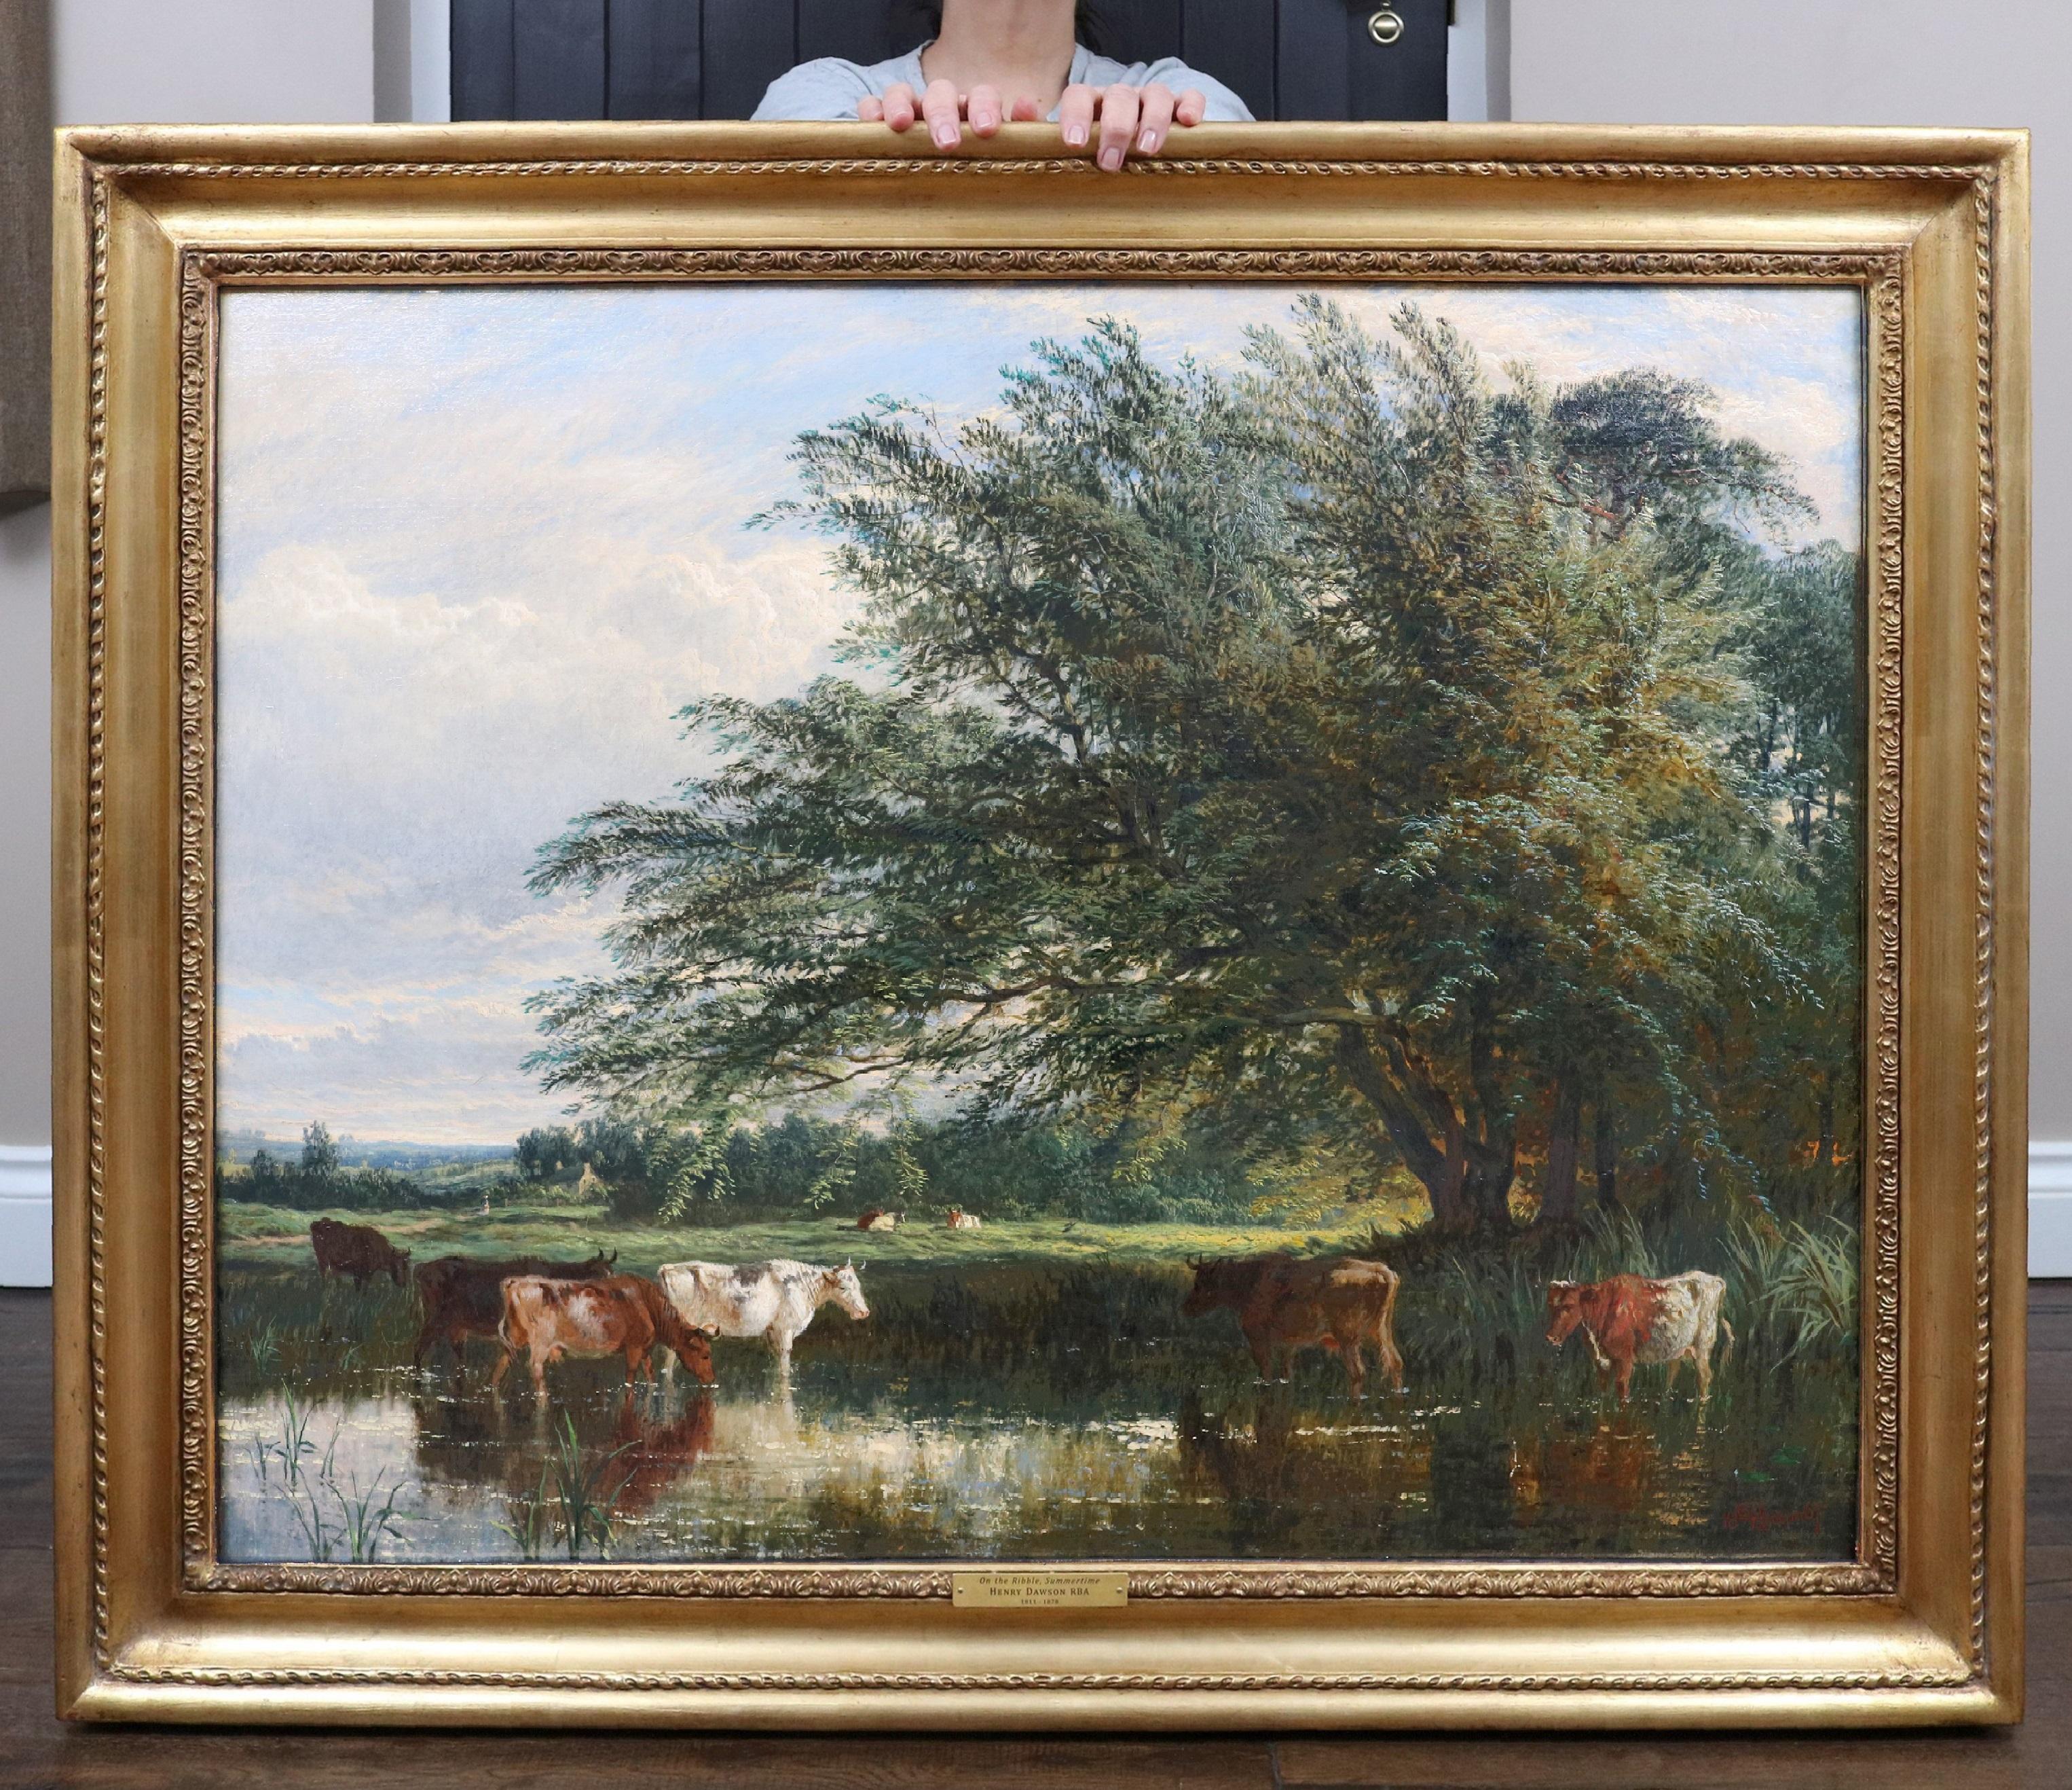 Henry Dawson Animal Painting - On the Ribble, Summertime - Large 19th Century English Landscape Oil Painting